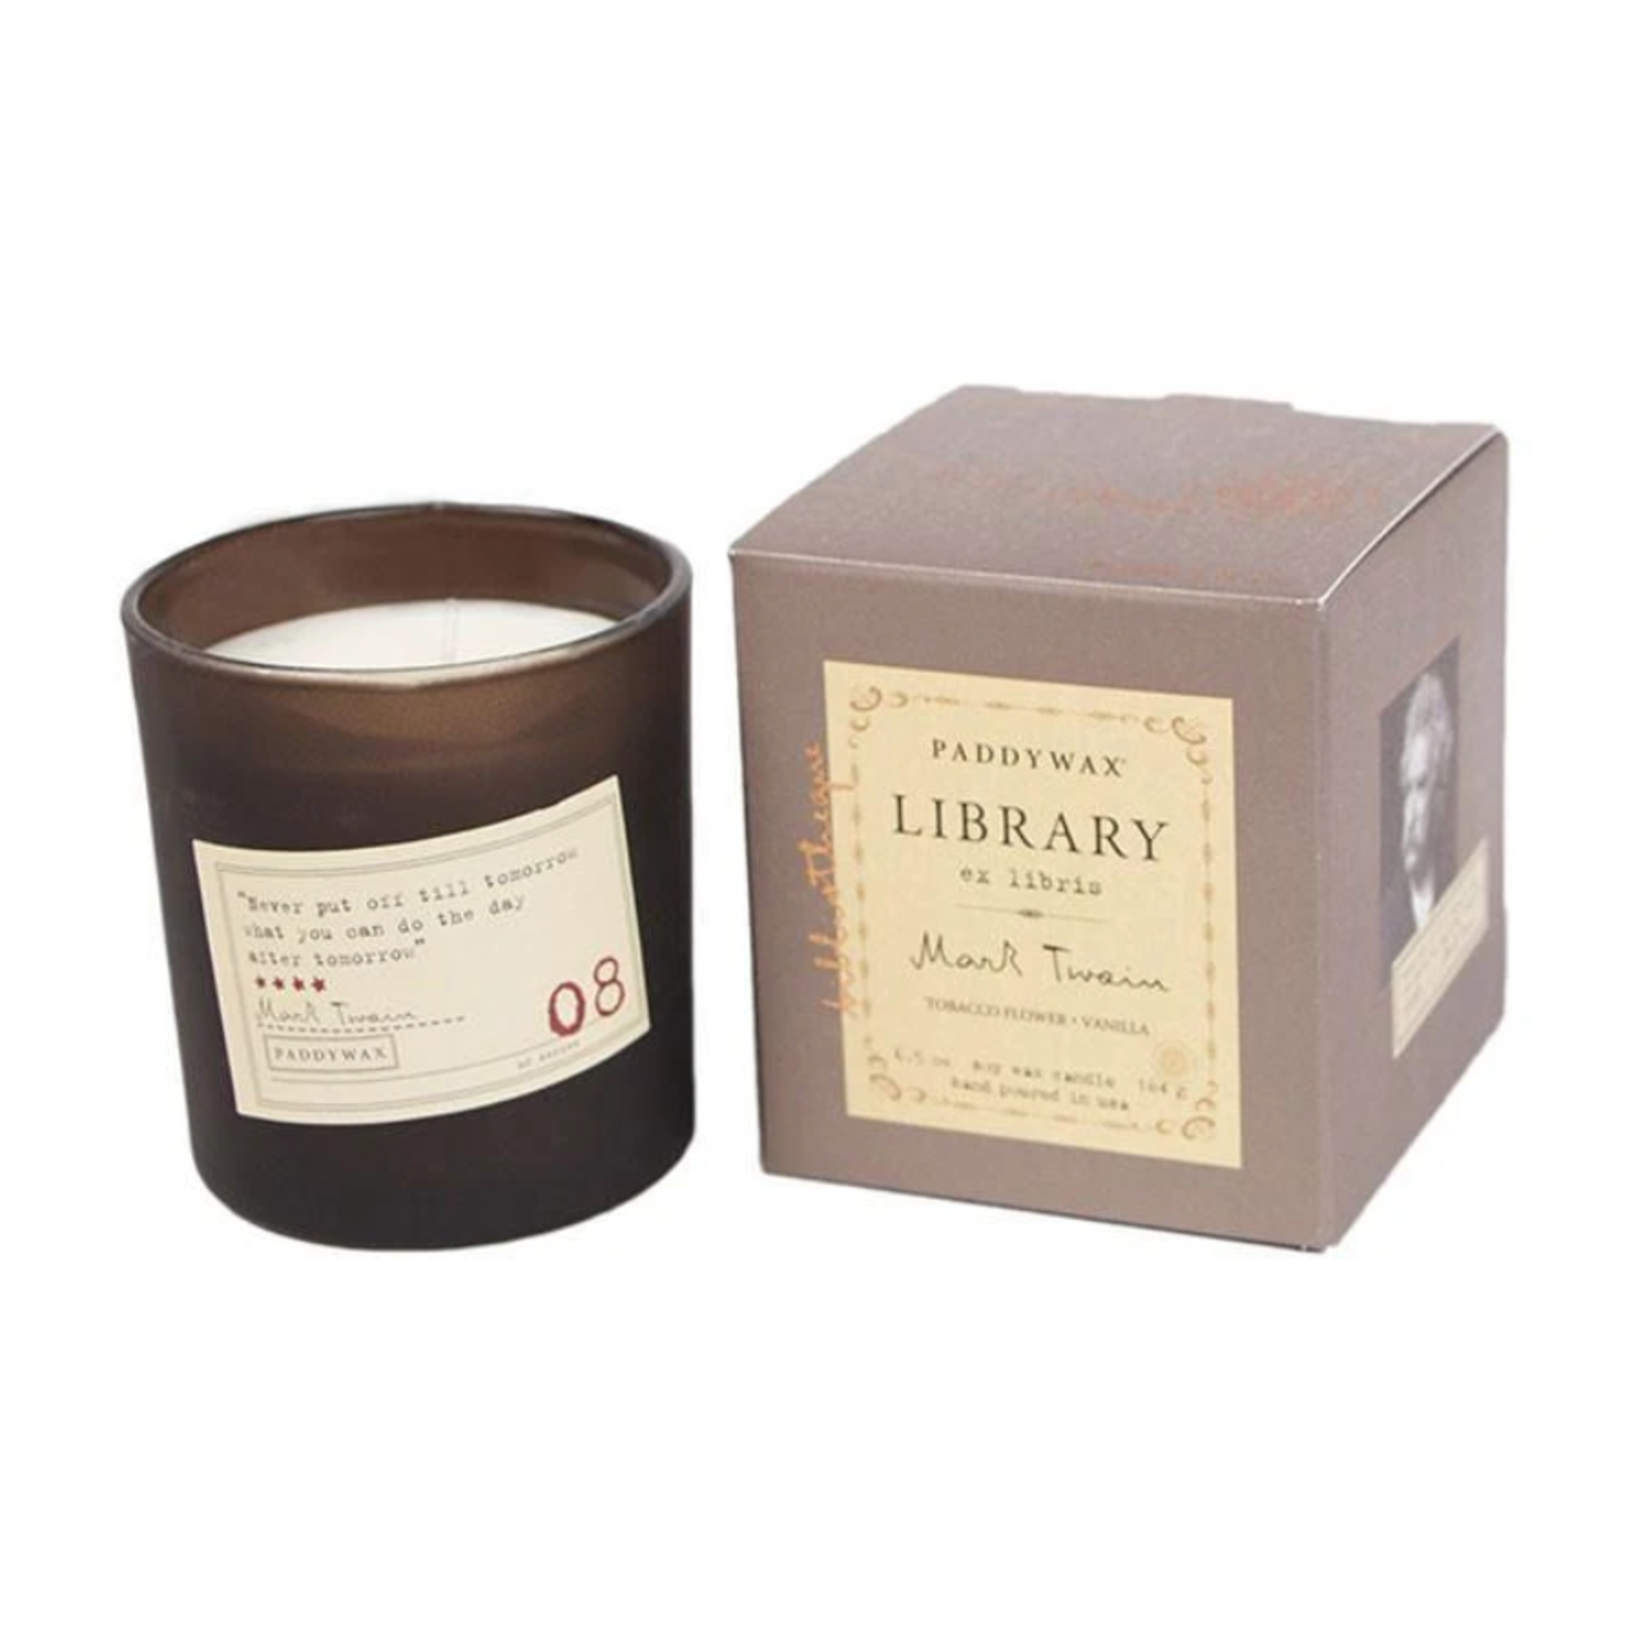 Paddywax Library Candle Series